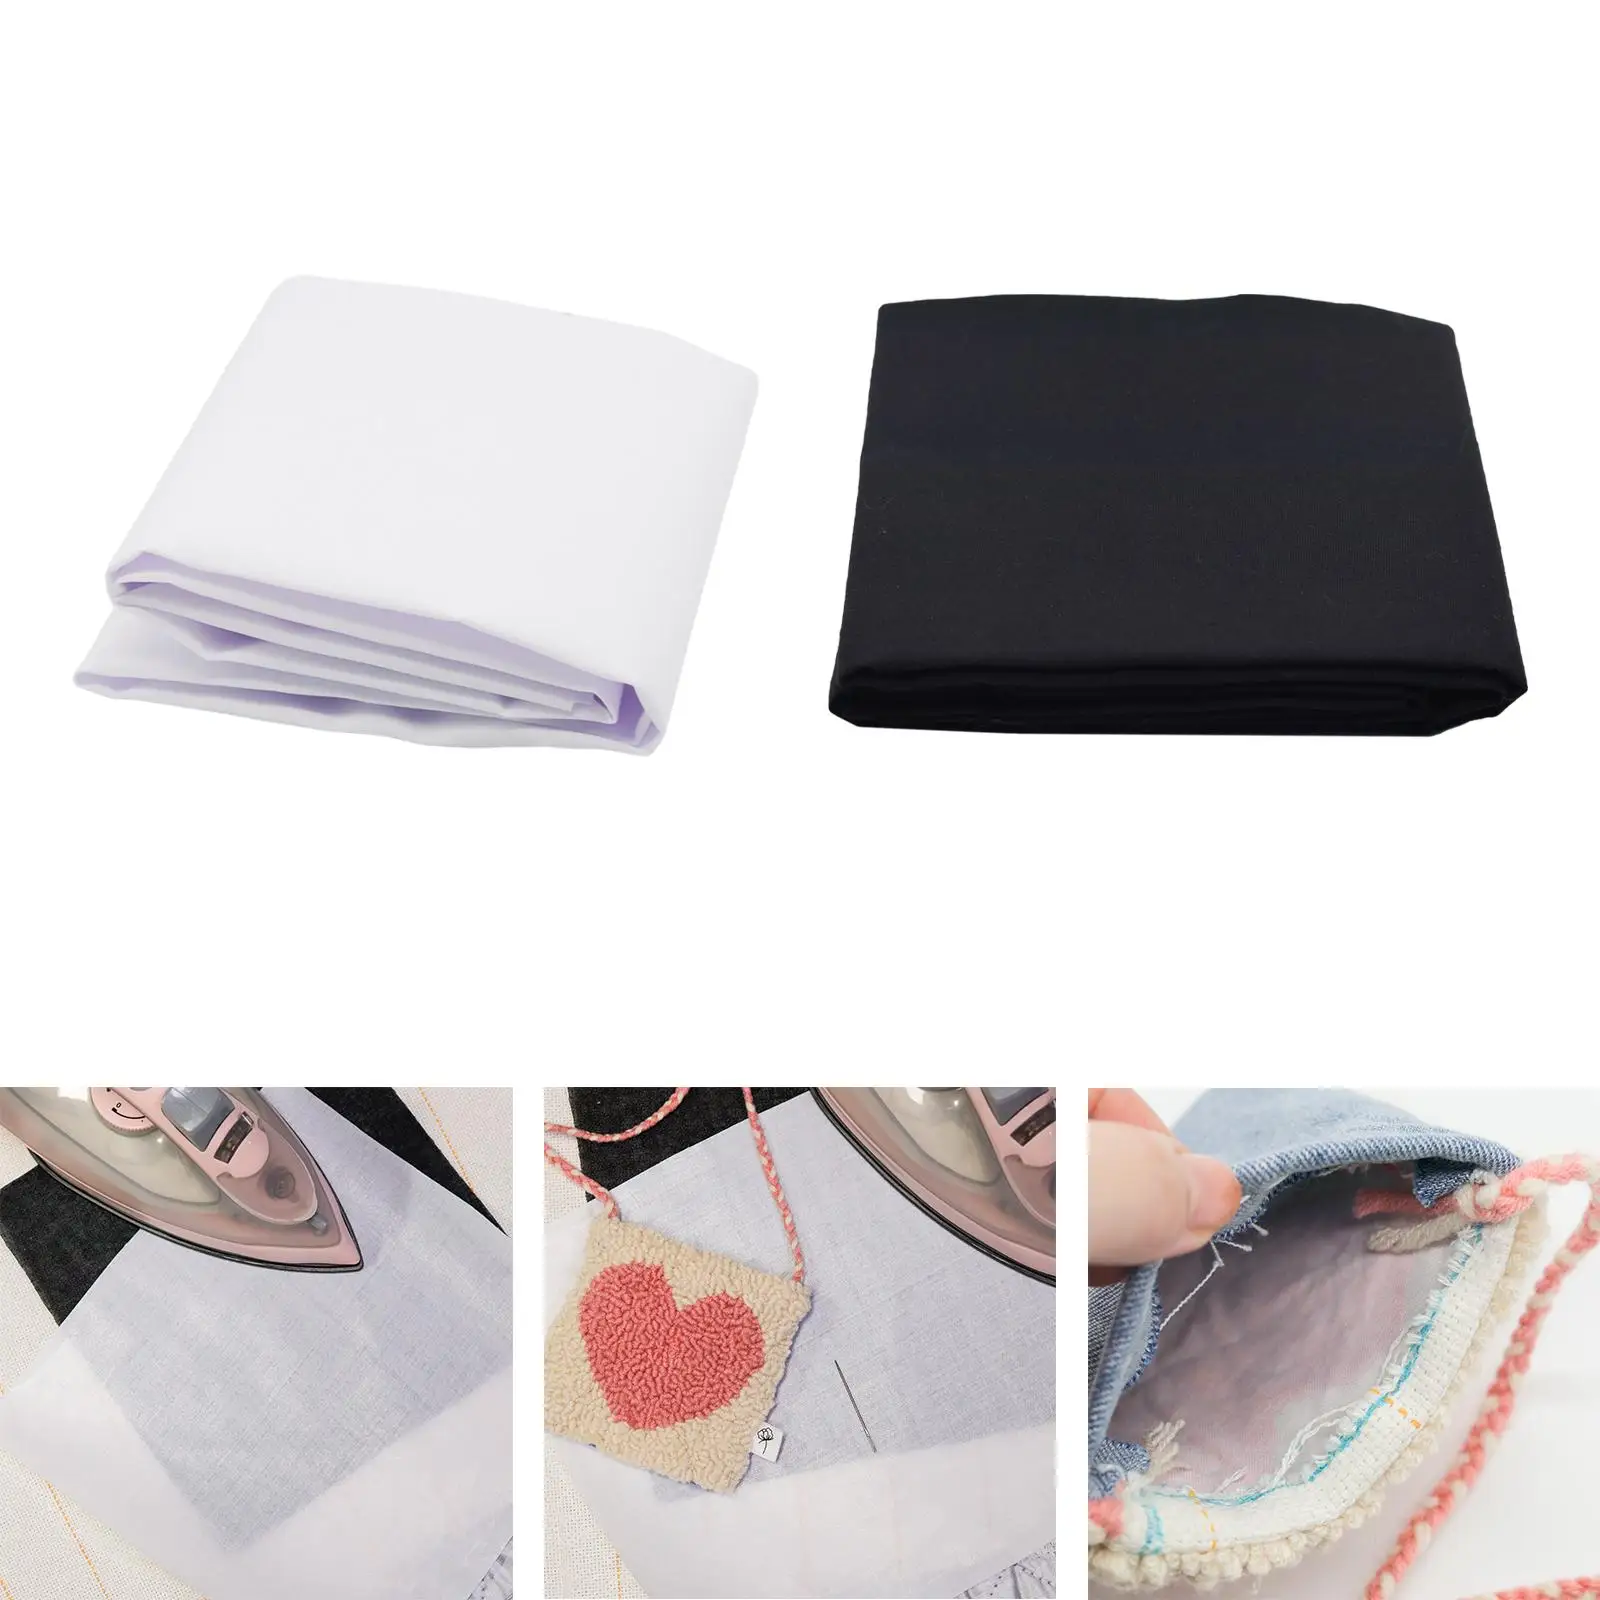 Ironing Fusible Lightweight Non terlining Cloth for DIY Tufting